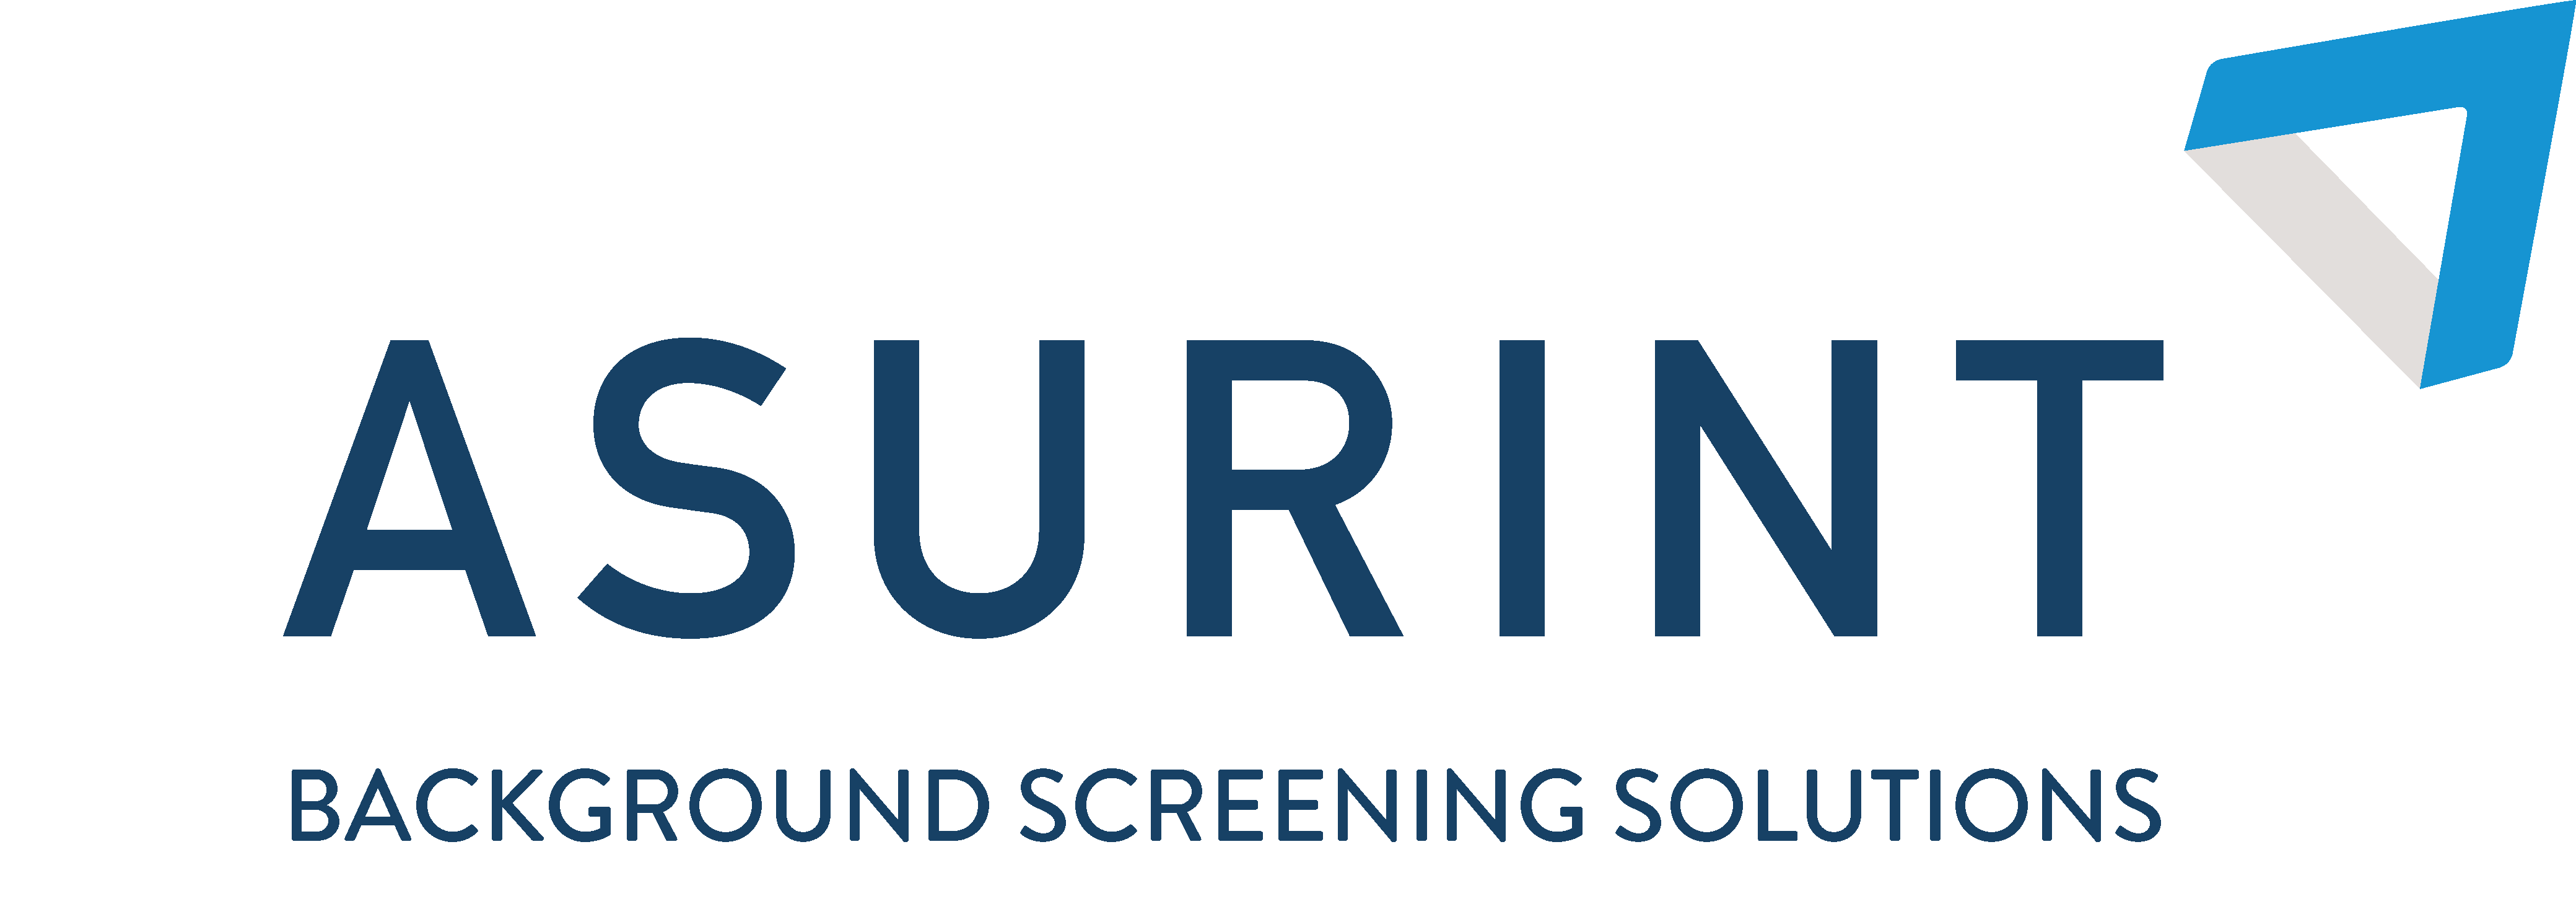 Asurint Welcomes All